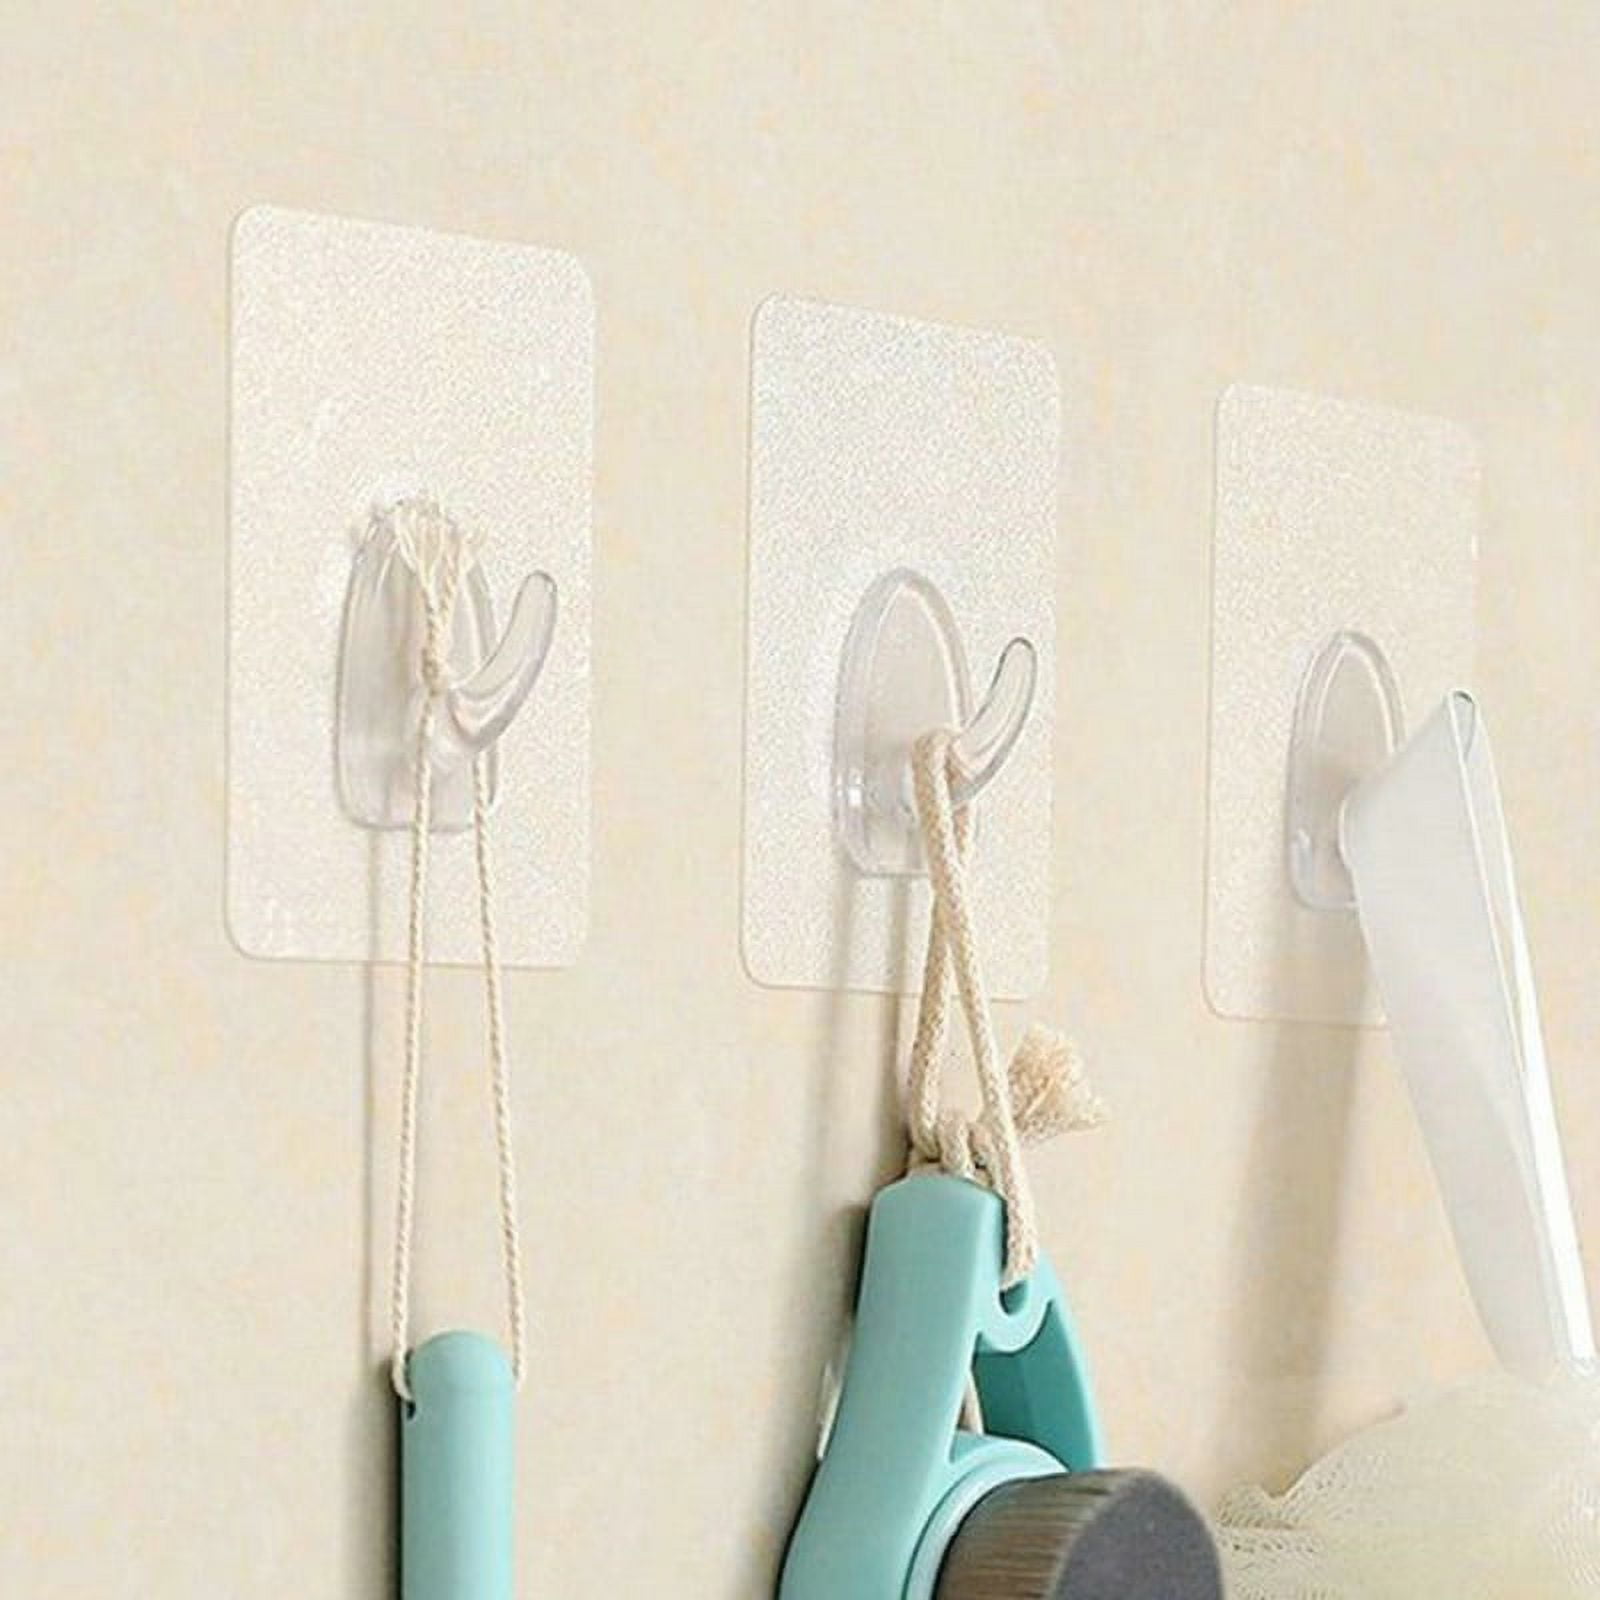 Brand: StickEase Type: Double Sided Adhesive Wall Hooks Specs